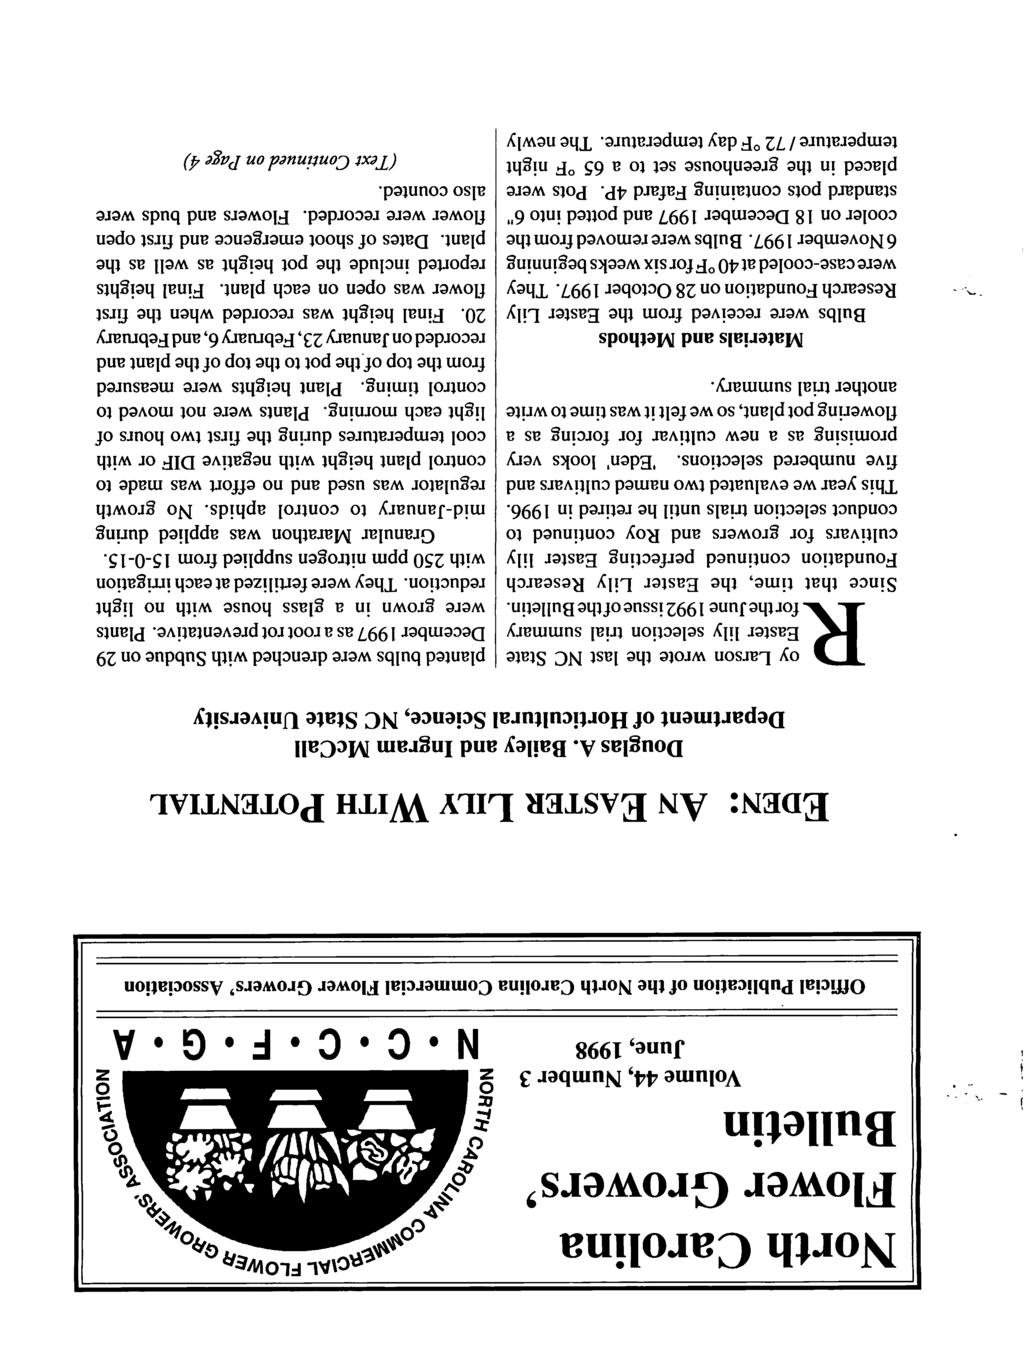 North Carolina Flower Growers' Bulletin Volume 44, Number 3 June, 1998 Official Publication of the North Carolina Commercial Flower Growers' Association Eden: An Easter Lily With Potential Douglas A.